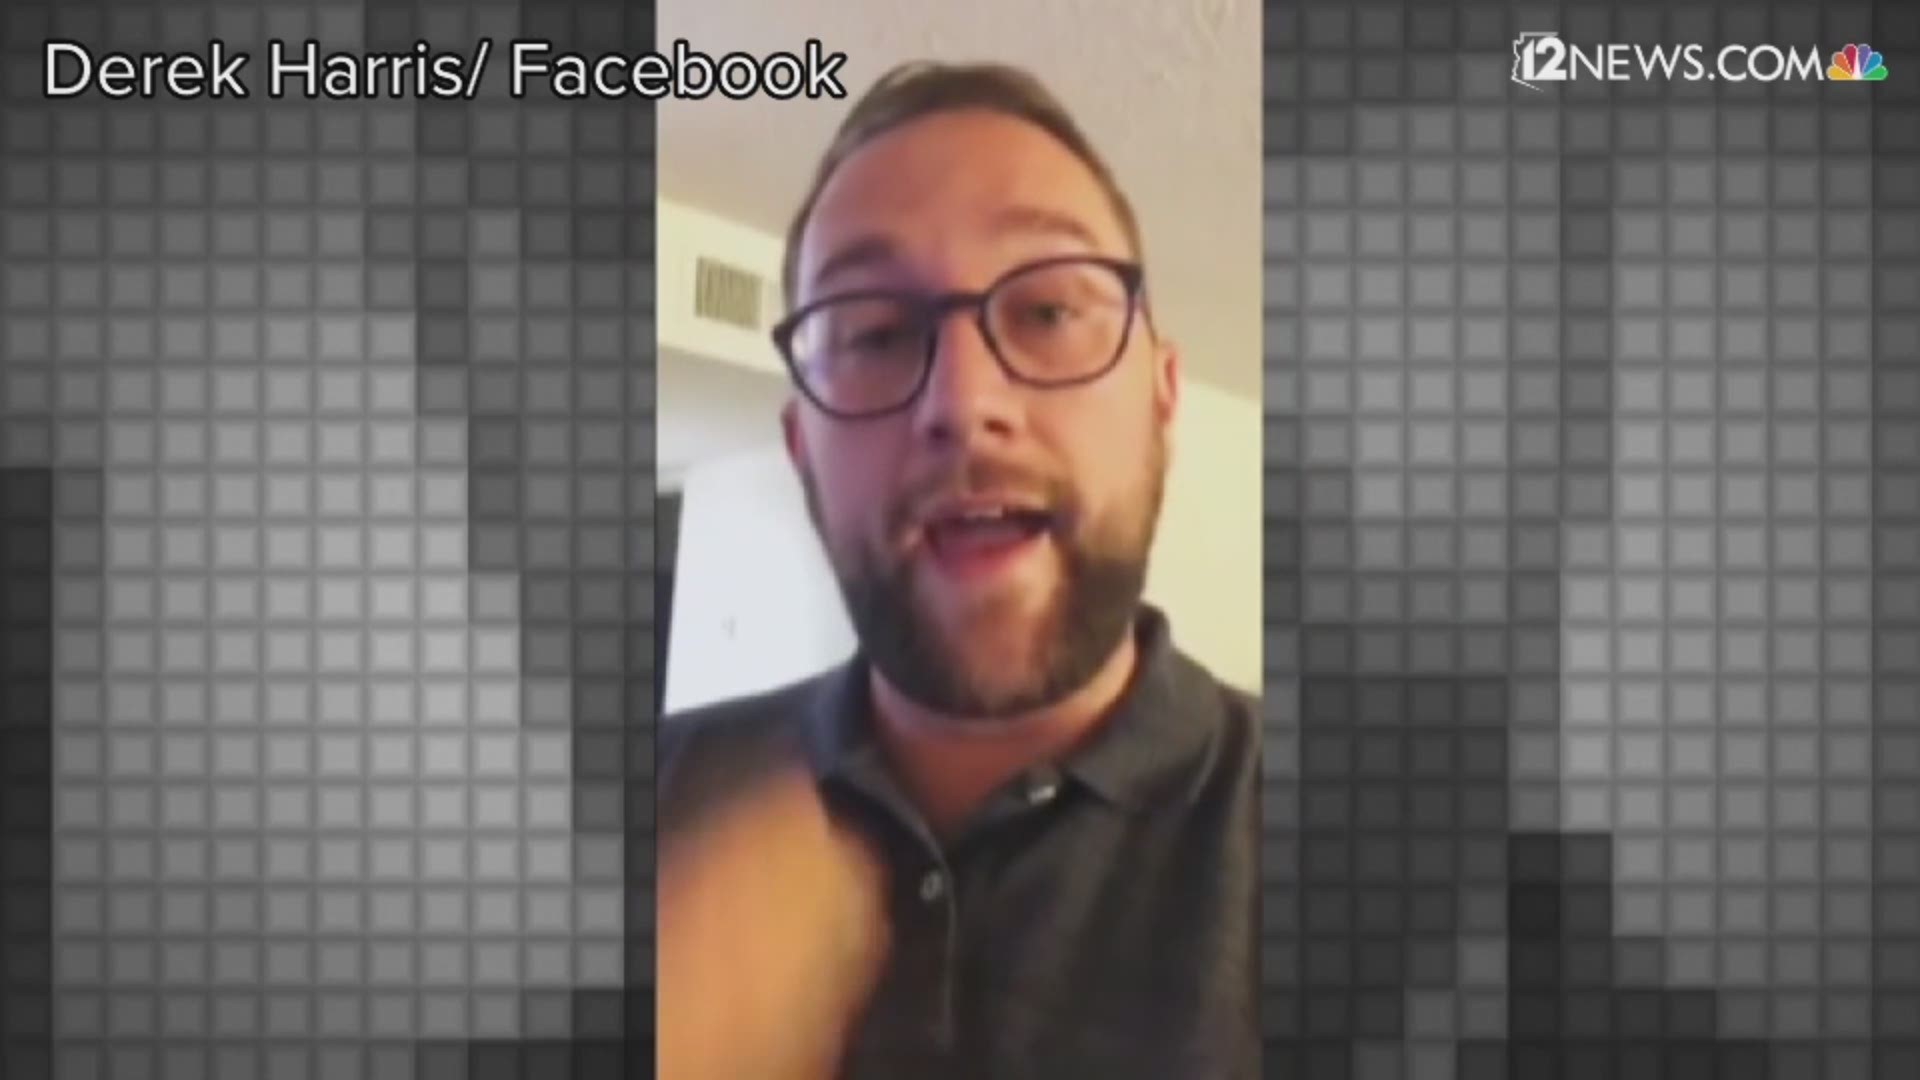 Derek Harris, a leader of Arizona Educators United, posted a Facebook video Monday night alerting teachers to prepare for a "long-term walkout."